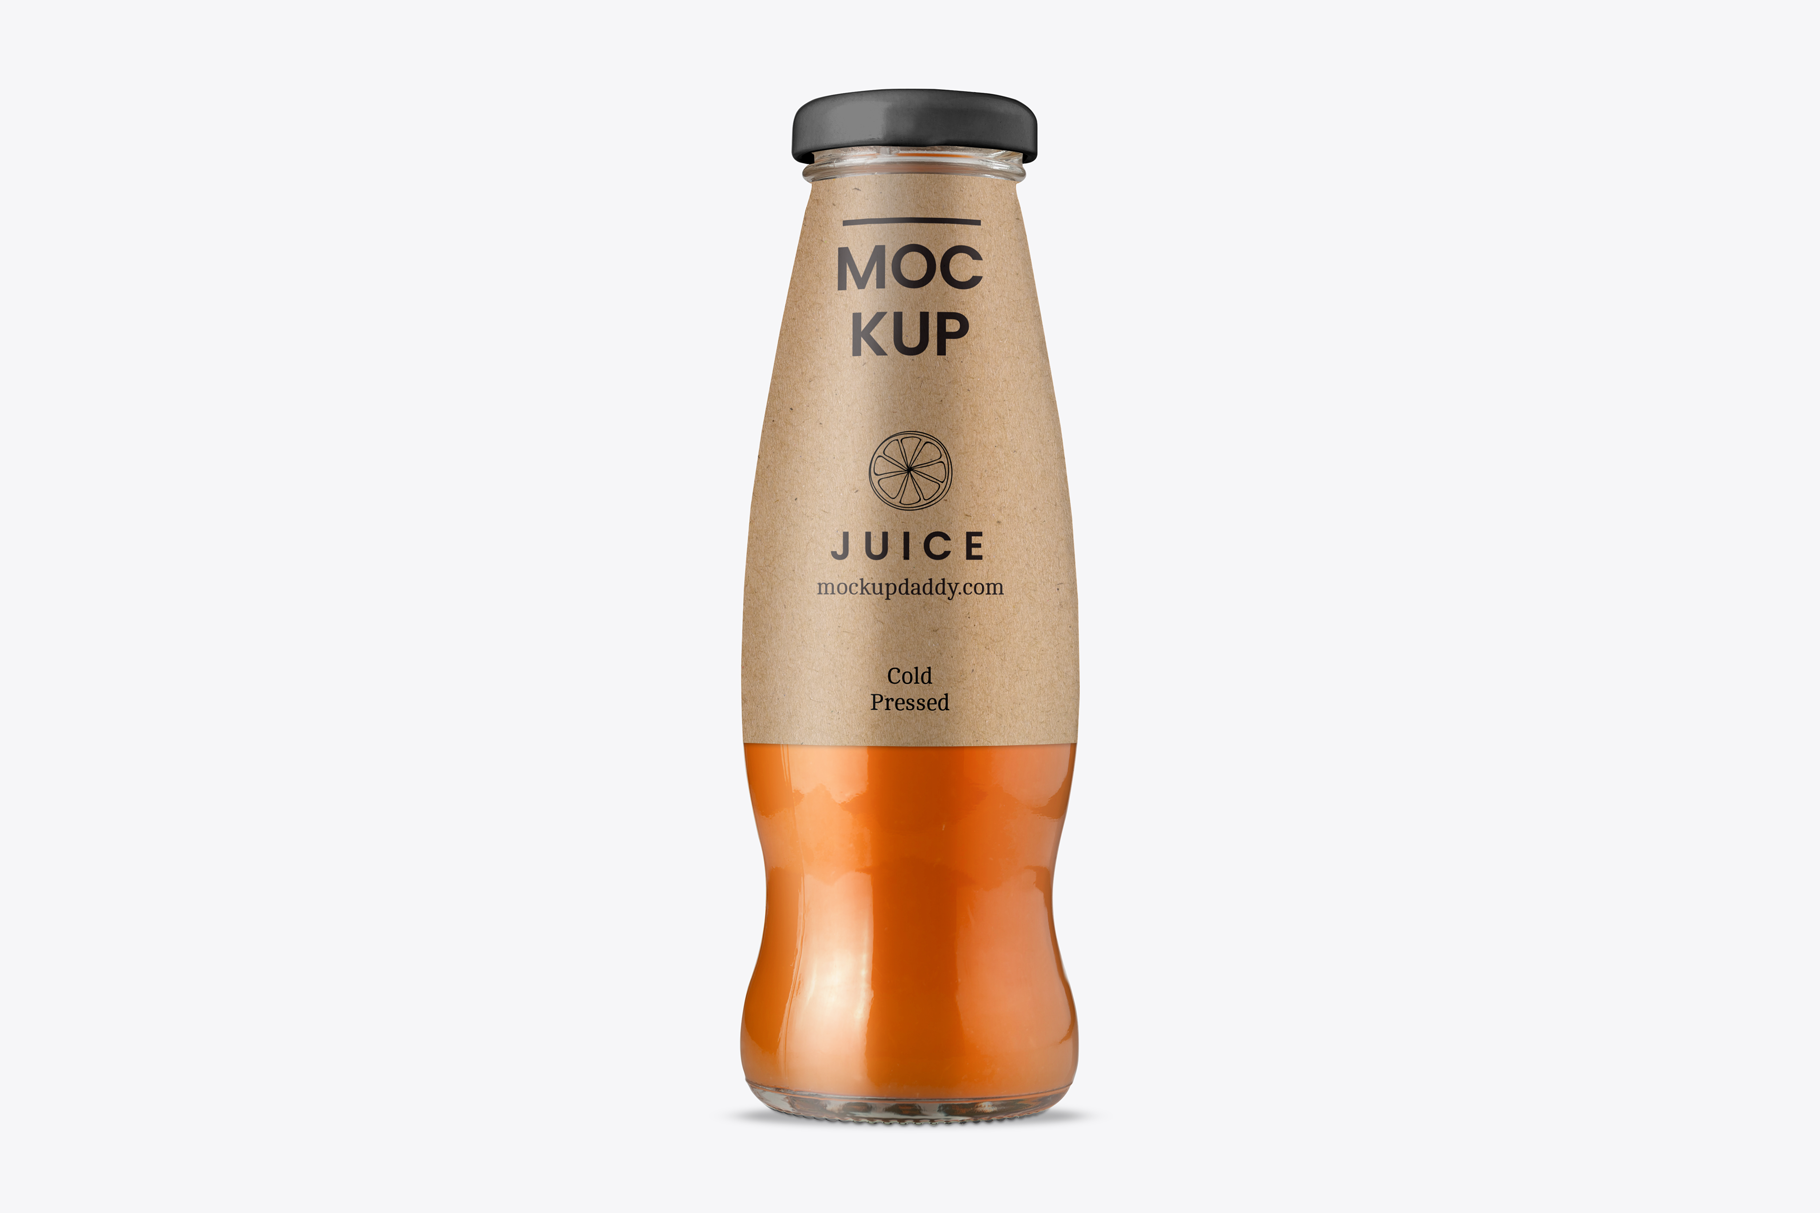 Glass Juice Bottle Mockup with brown label and black lid